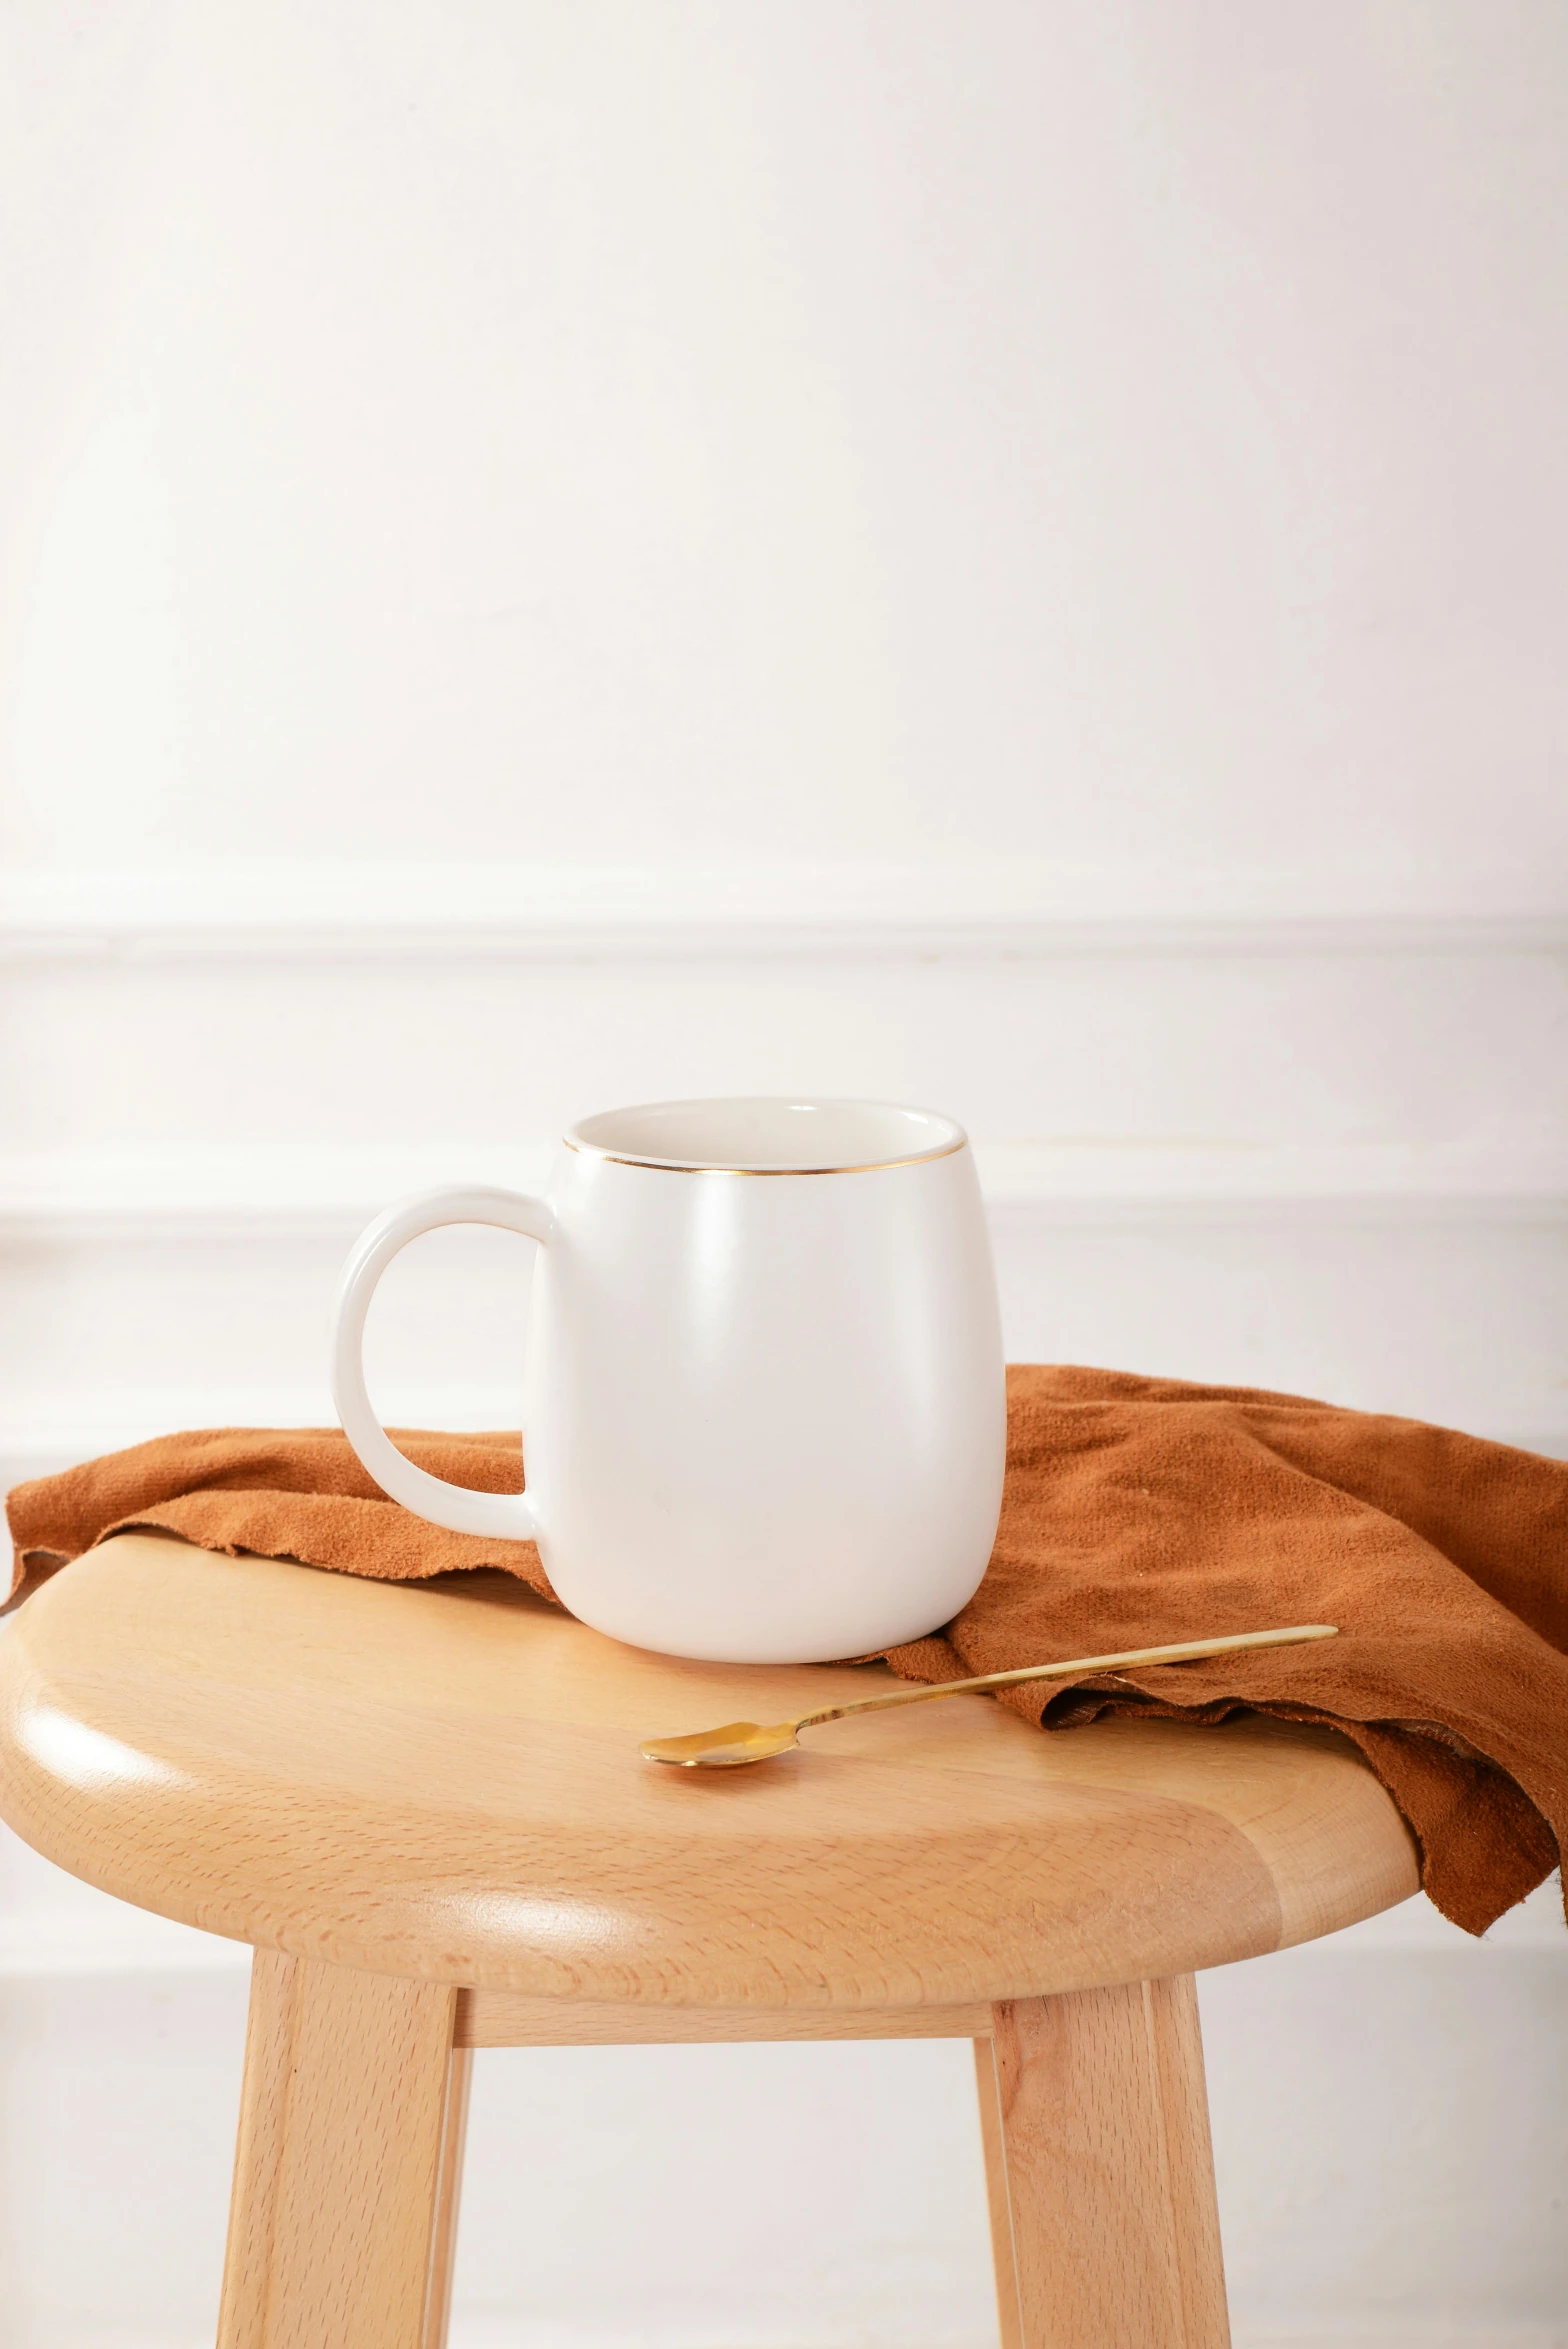 a wooden stool with a white coffee cup and teaspoon